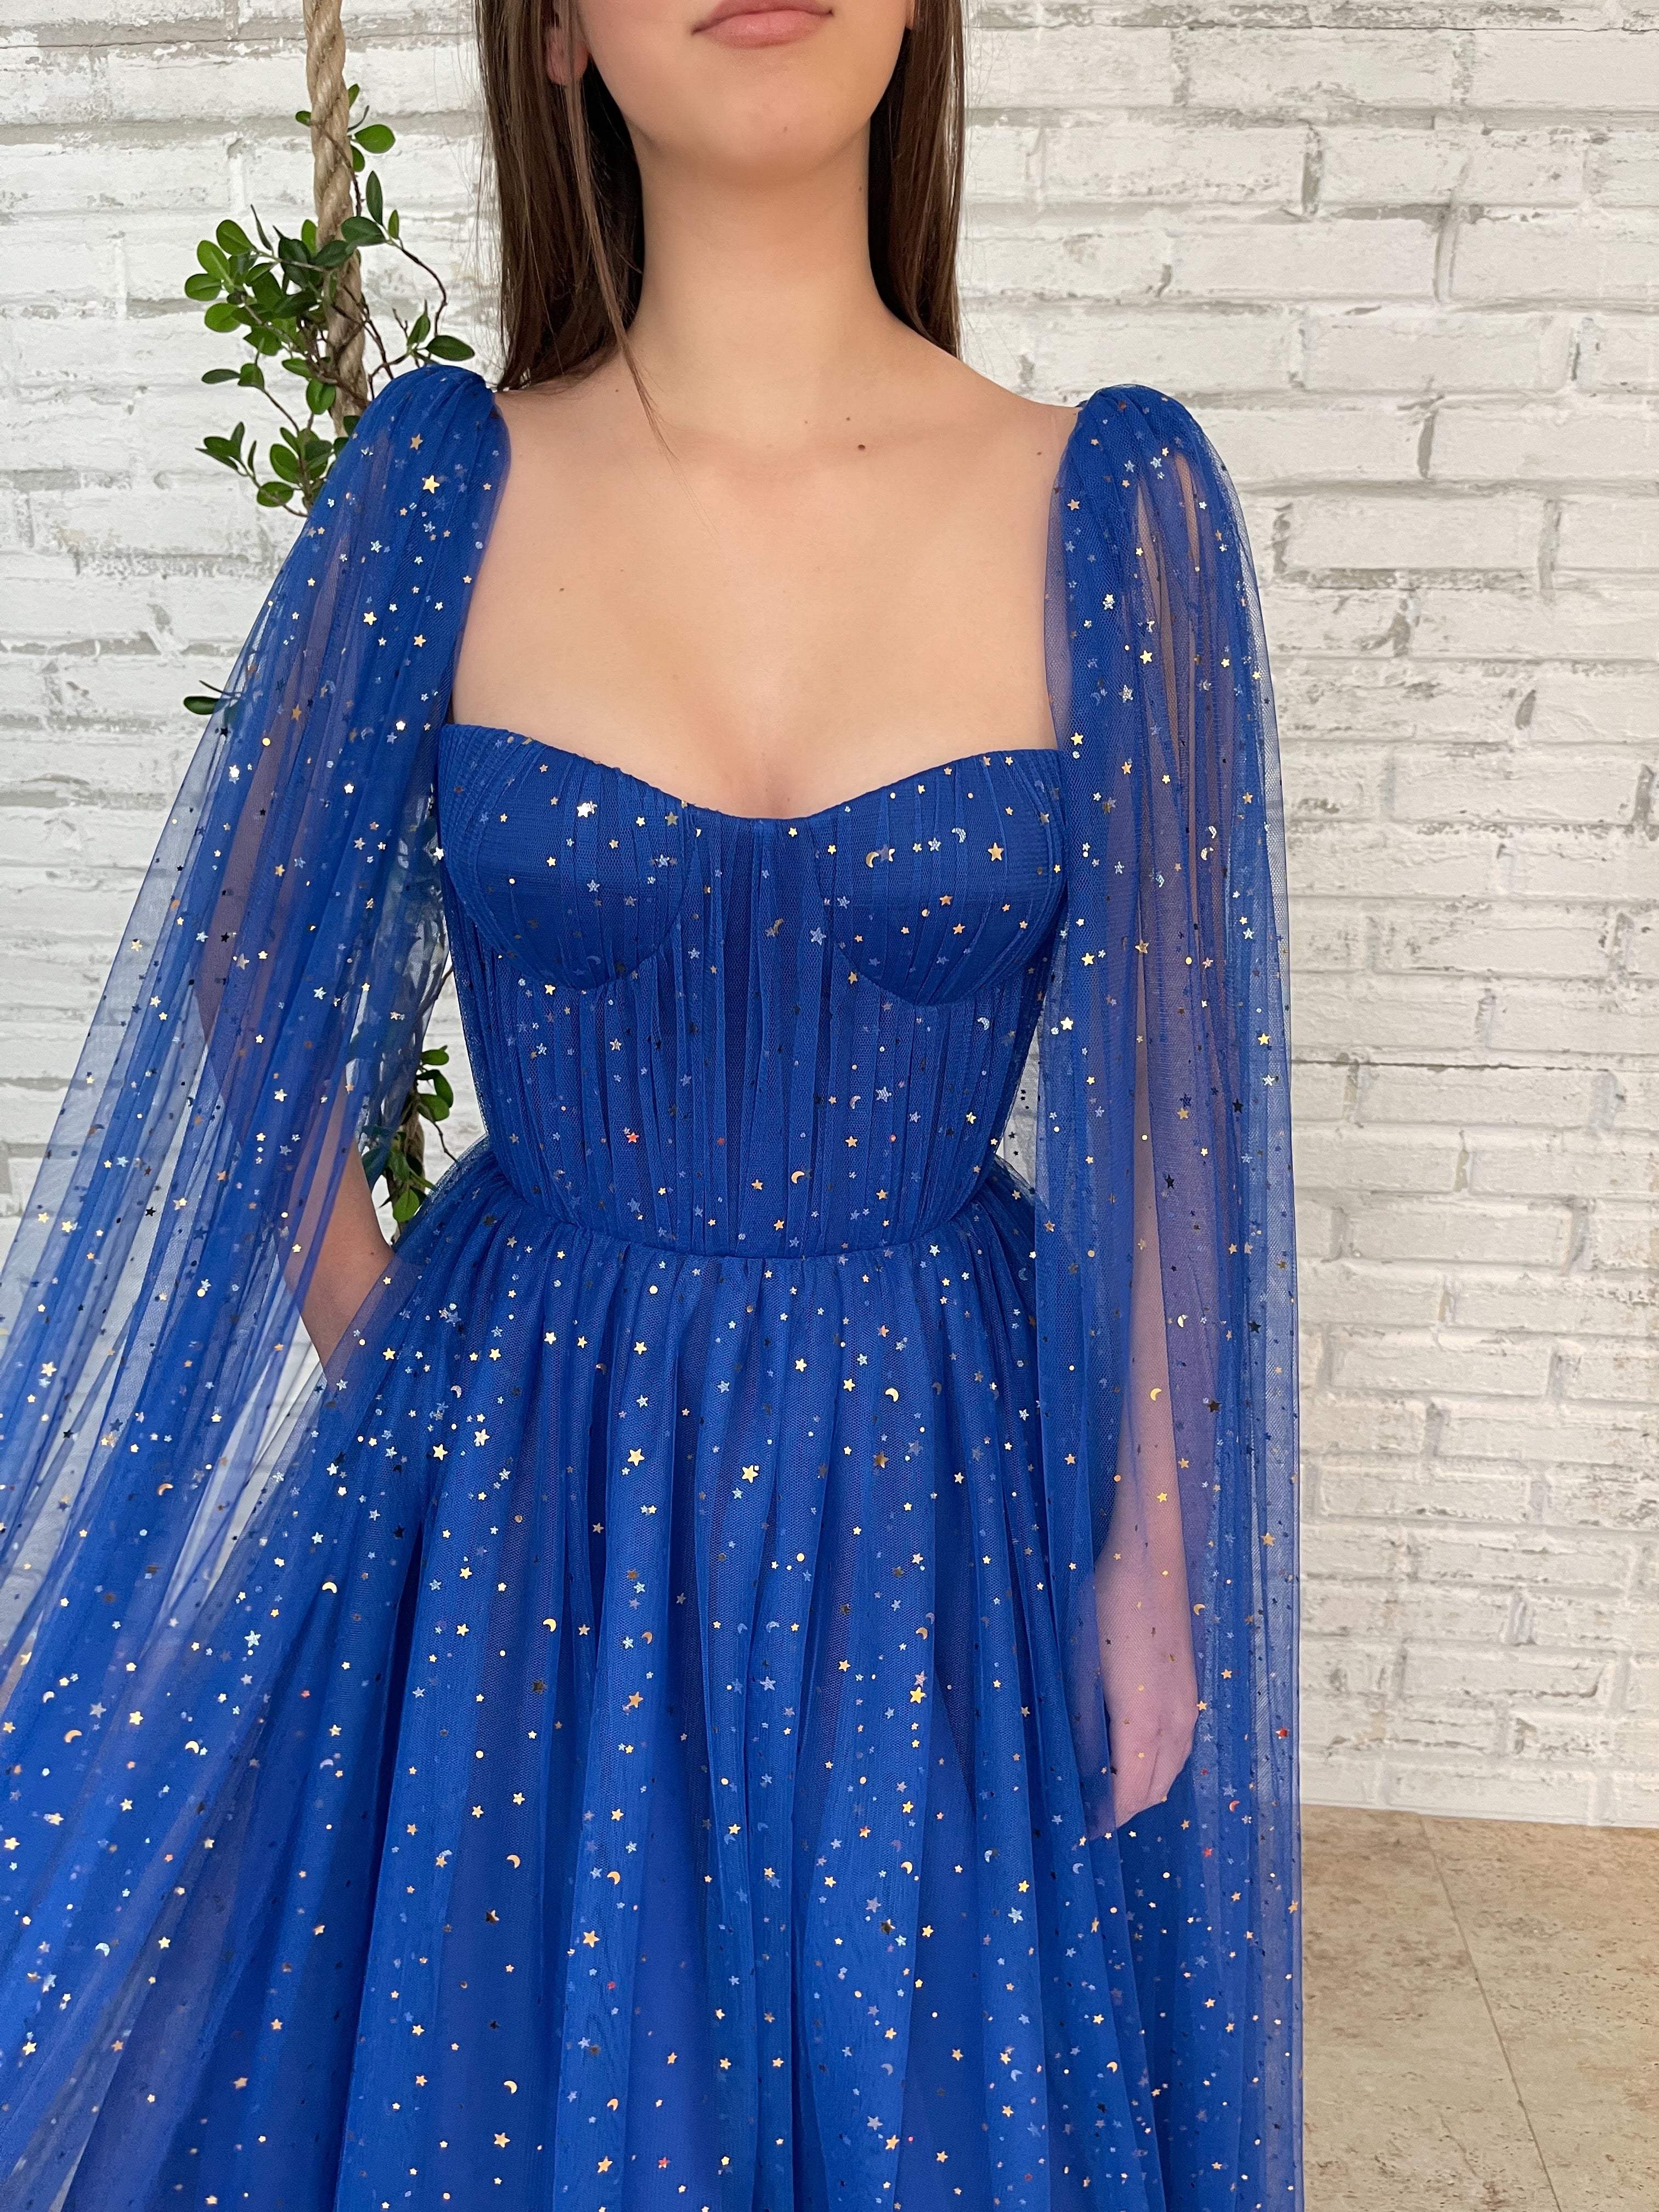 Blue A-Line dress with cape sleeves, spaghetti straps and starry fabric